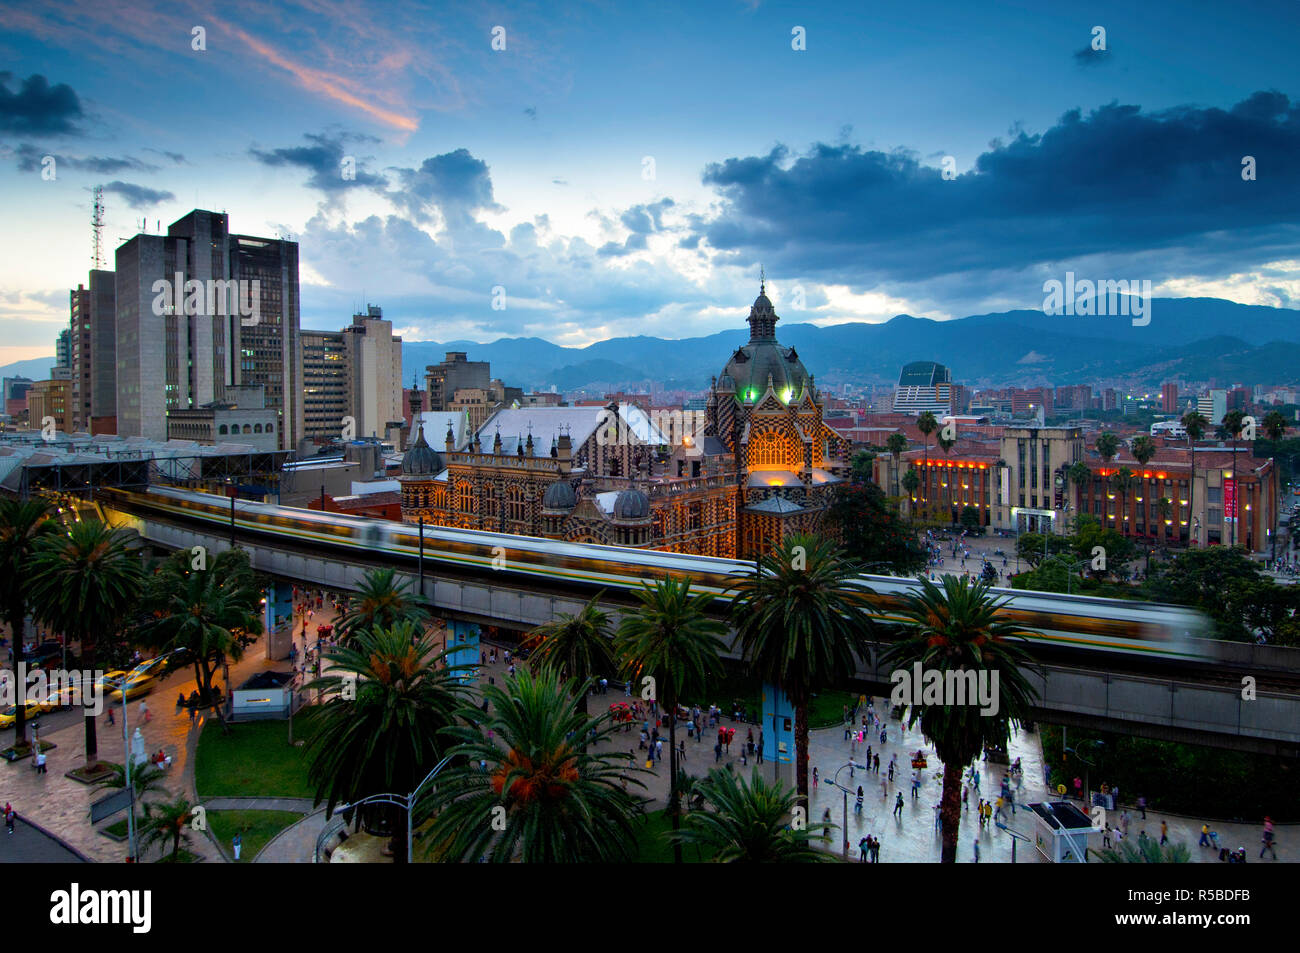 Medellin, Colombia, Metro, Parque Berrio Metro Station, Palace Of Culture, Plaza Botero, Sculptures Of Fernando Botero, Museum Of Antioquia, Dusk, Motion, Andes Mountains, Aburra Valley, Spanish Stock Photo